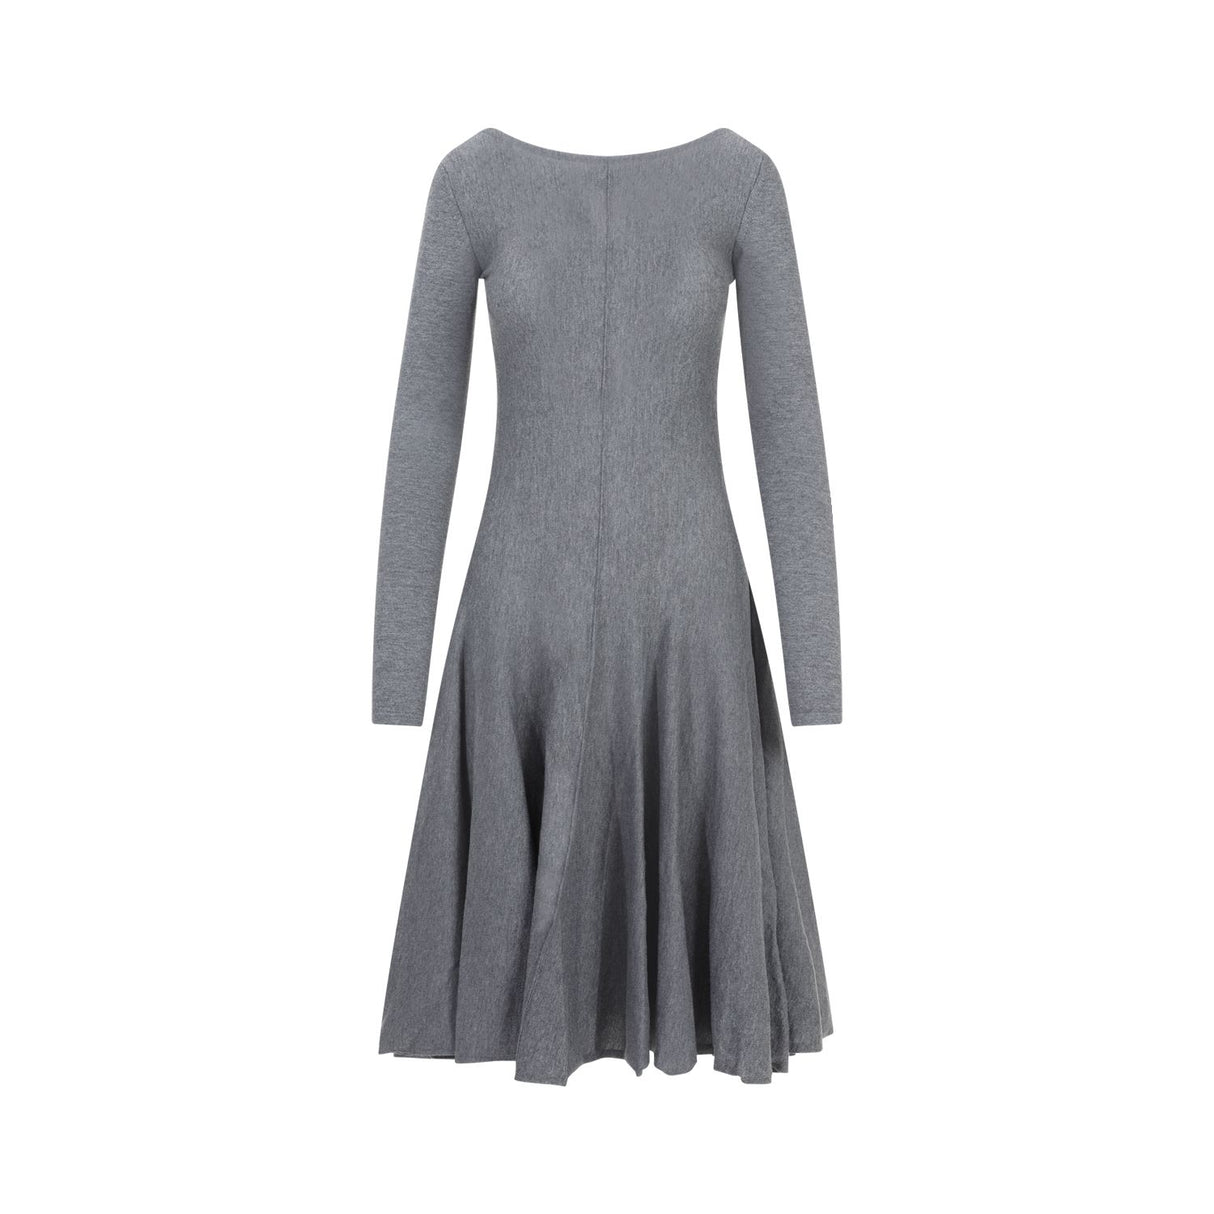 KHAITE Cozy and Chic Grey Wool Dress for Women - FW23 Collection